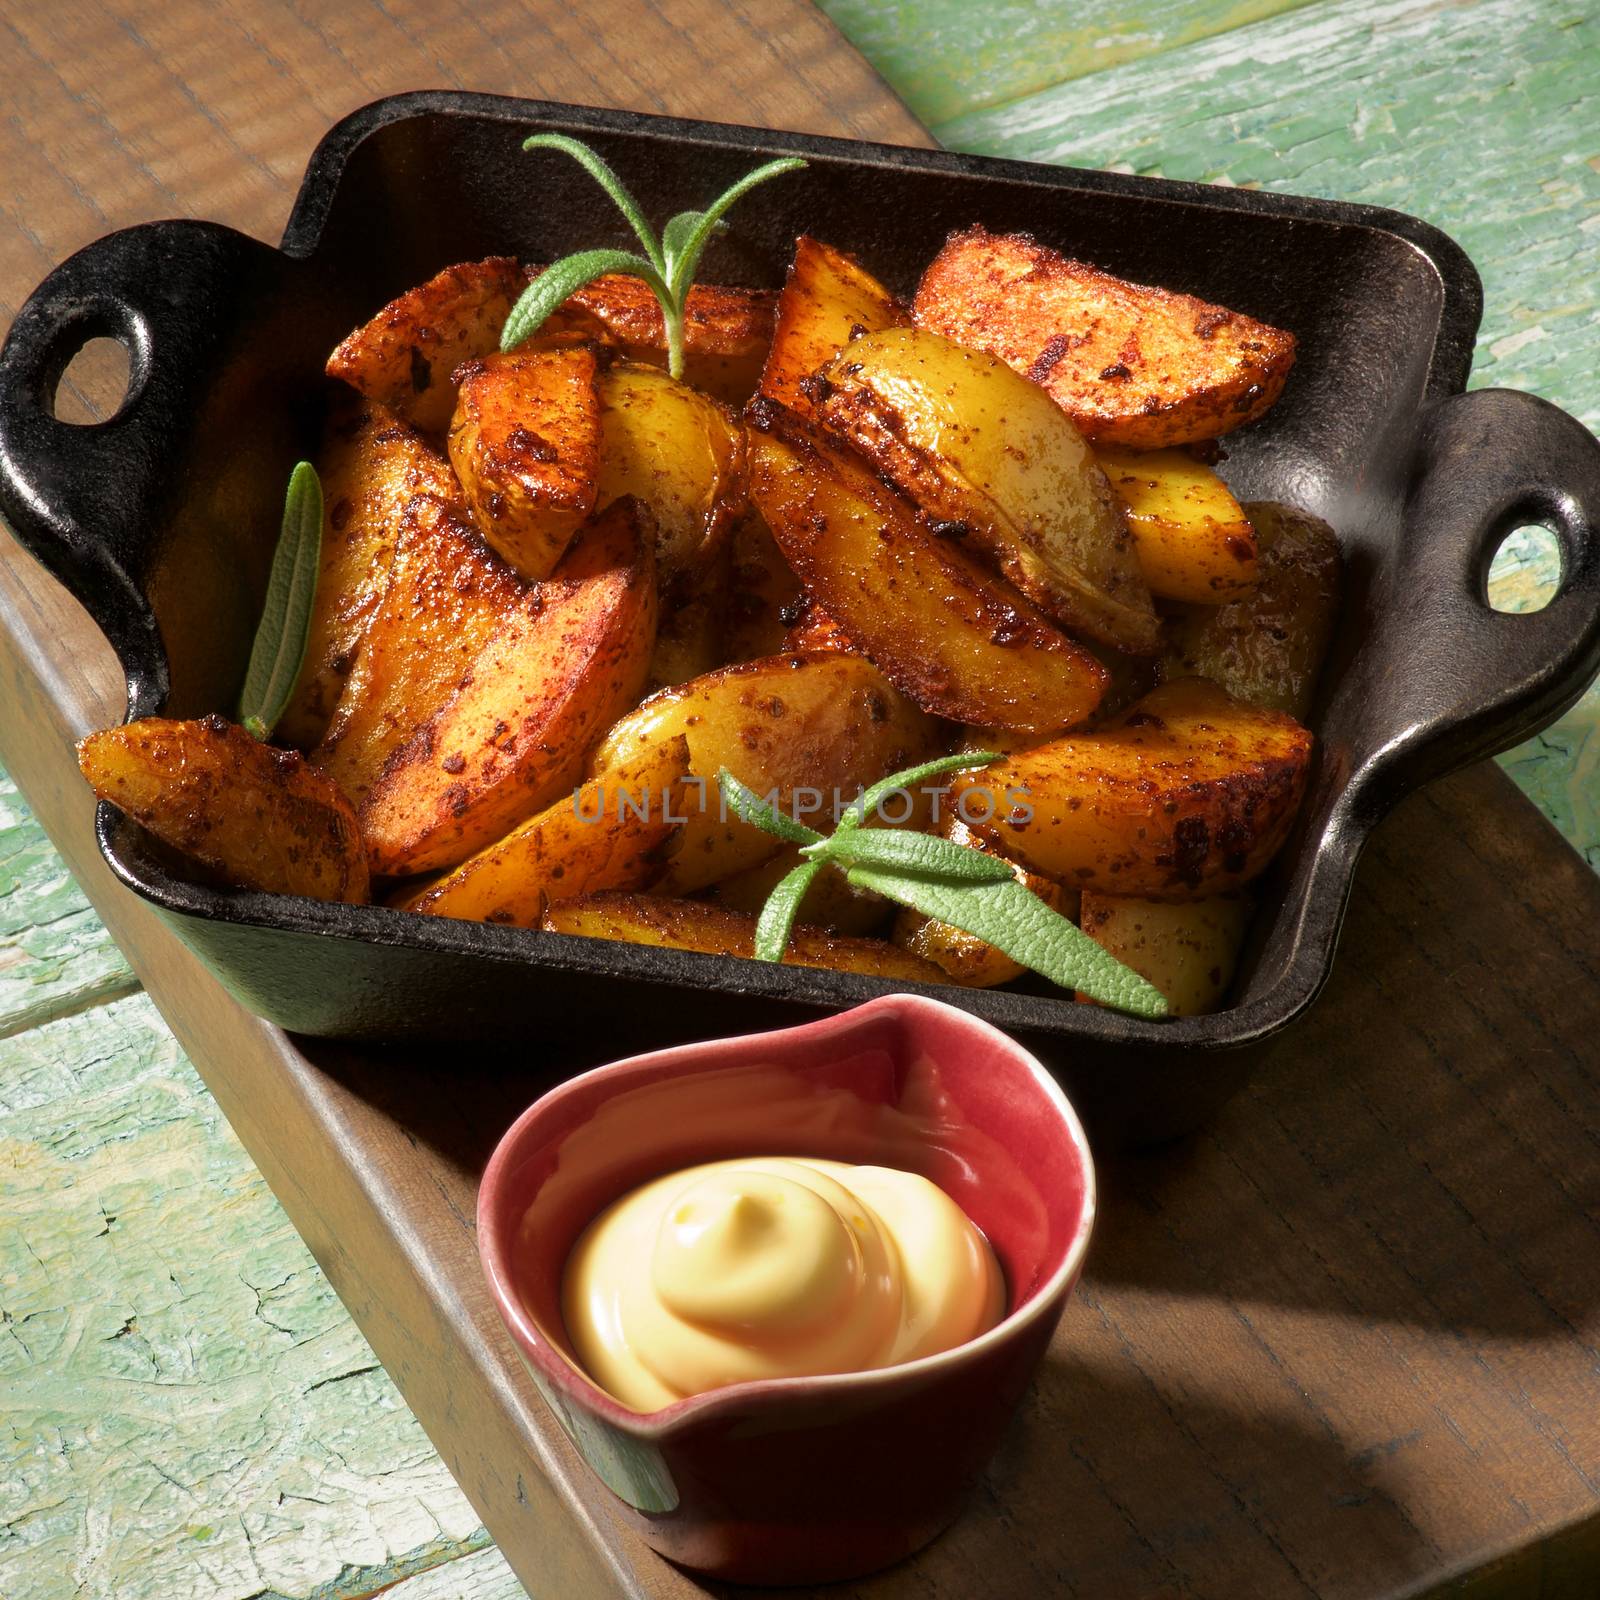 Potato Wedges and Cheese Sauce by zhekos